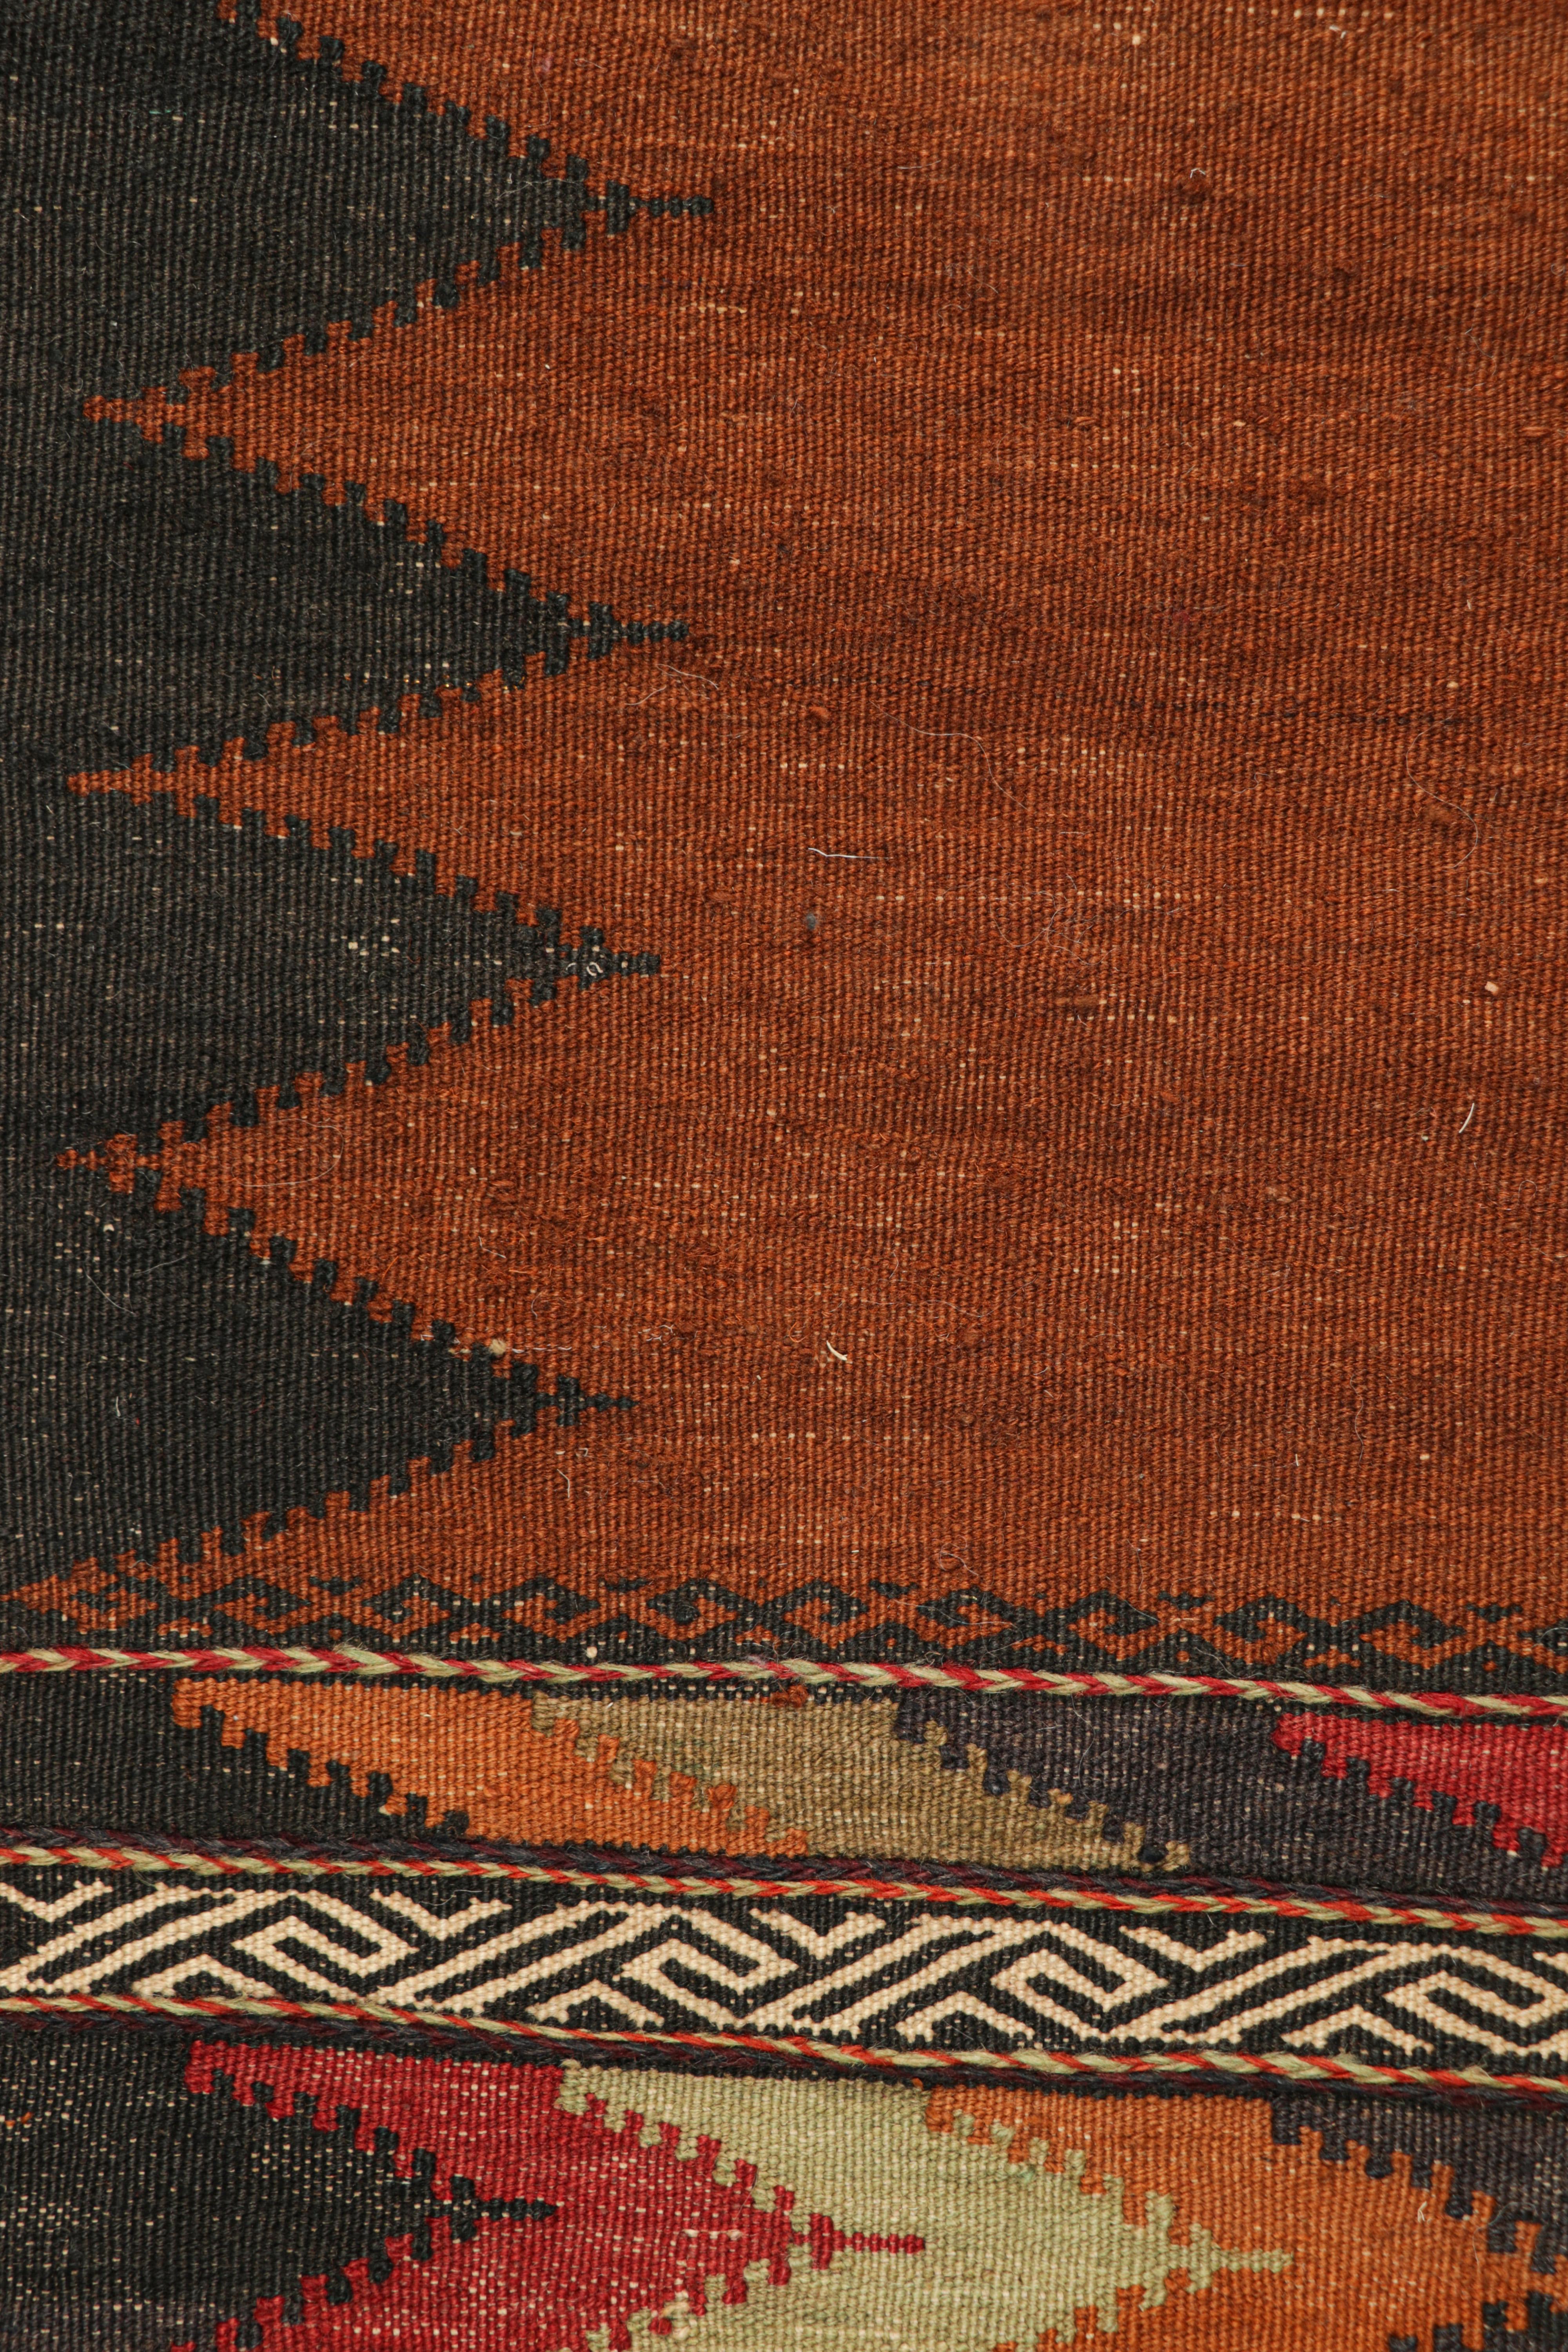 Tribal Vintage Afghan Kilim in Rust, with Polychromatic Patterns from Rug & Kilim For Sale